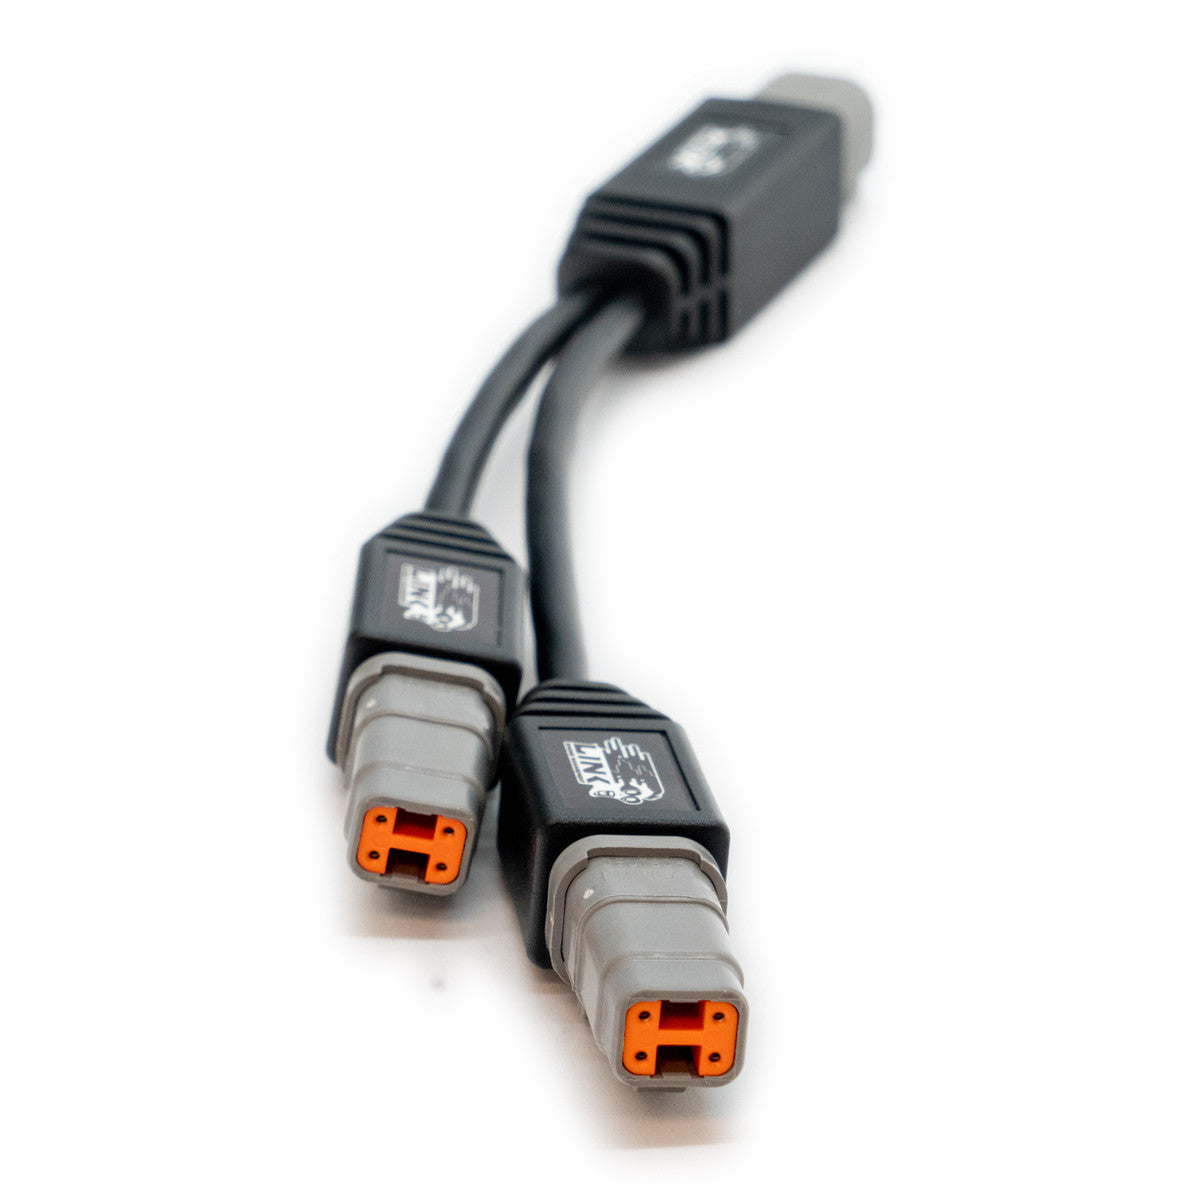 LINK CANTEE - CAN Splitter Cable